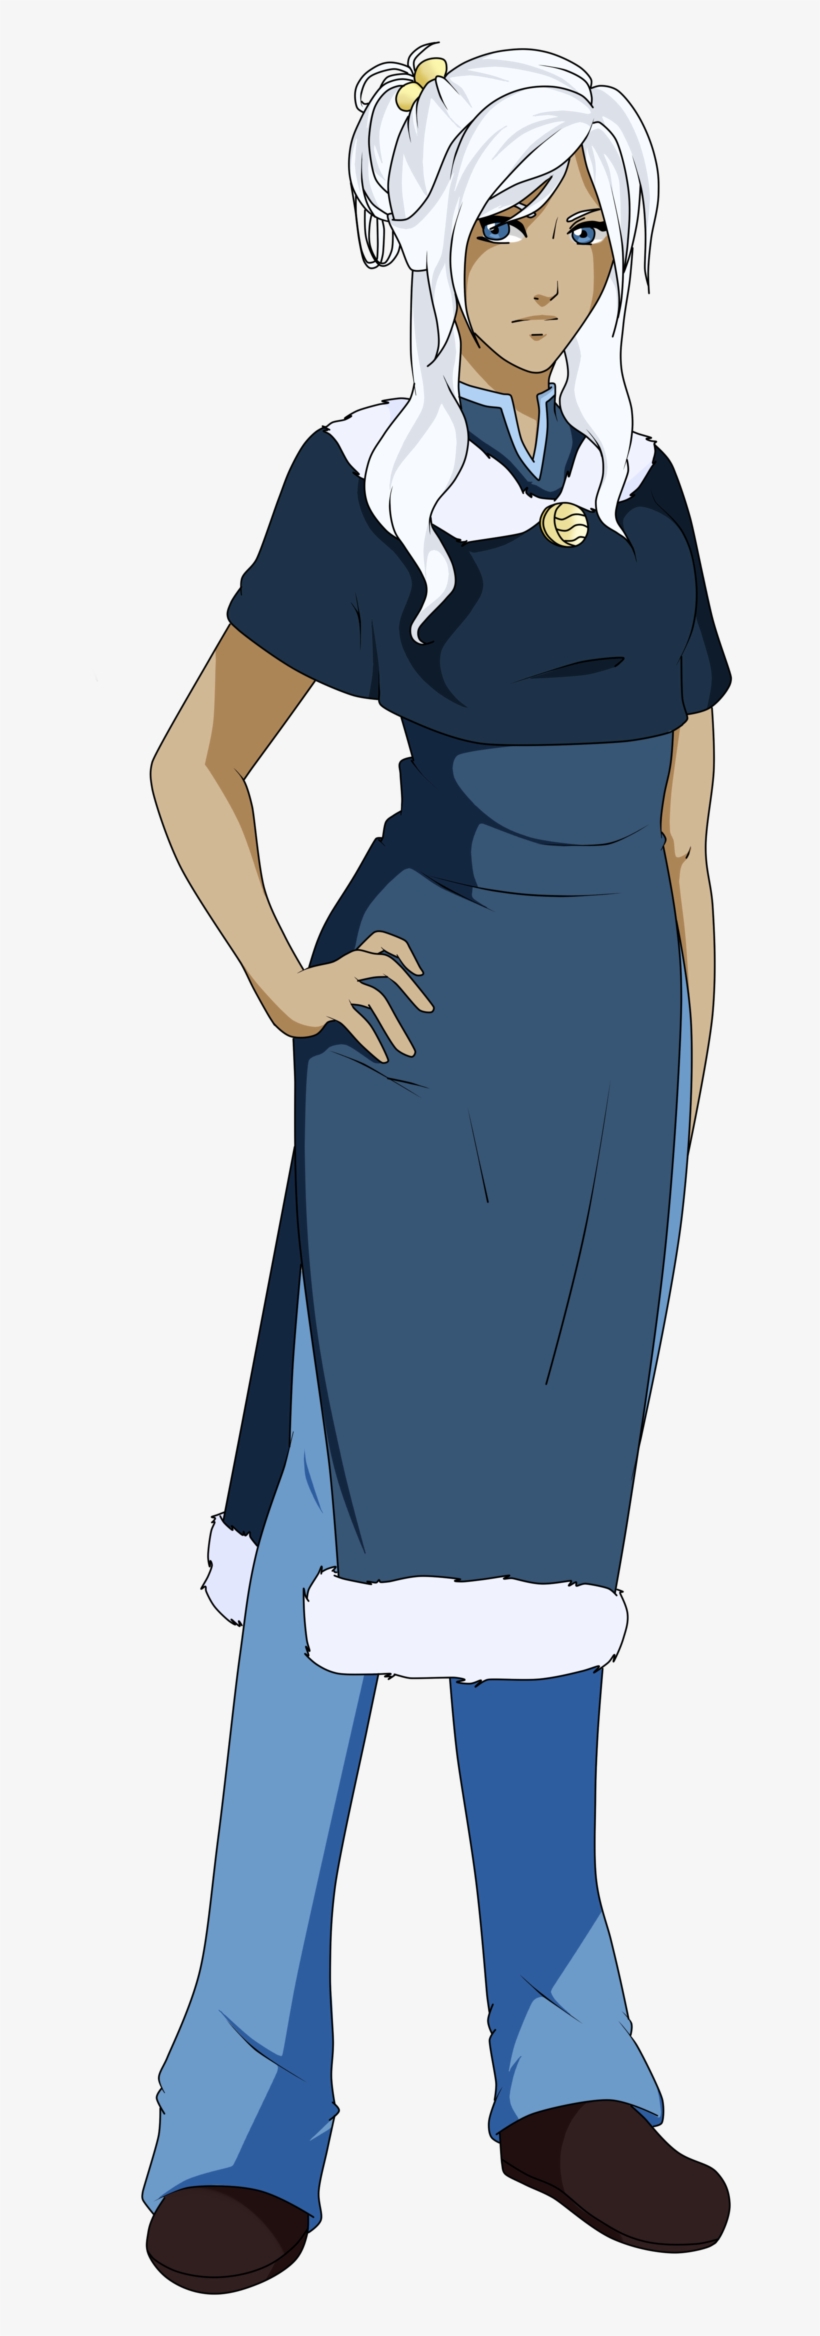 The Last Airbender Oc - Avatar The Last Airbender White Hair, transparent png #7683272